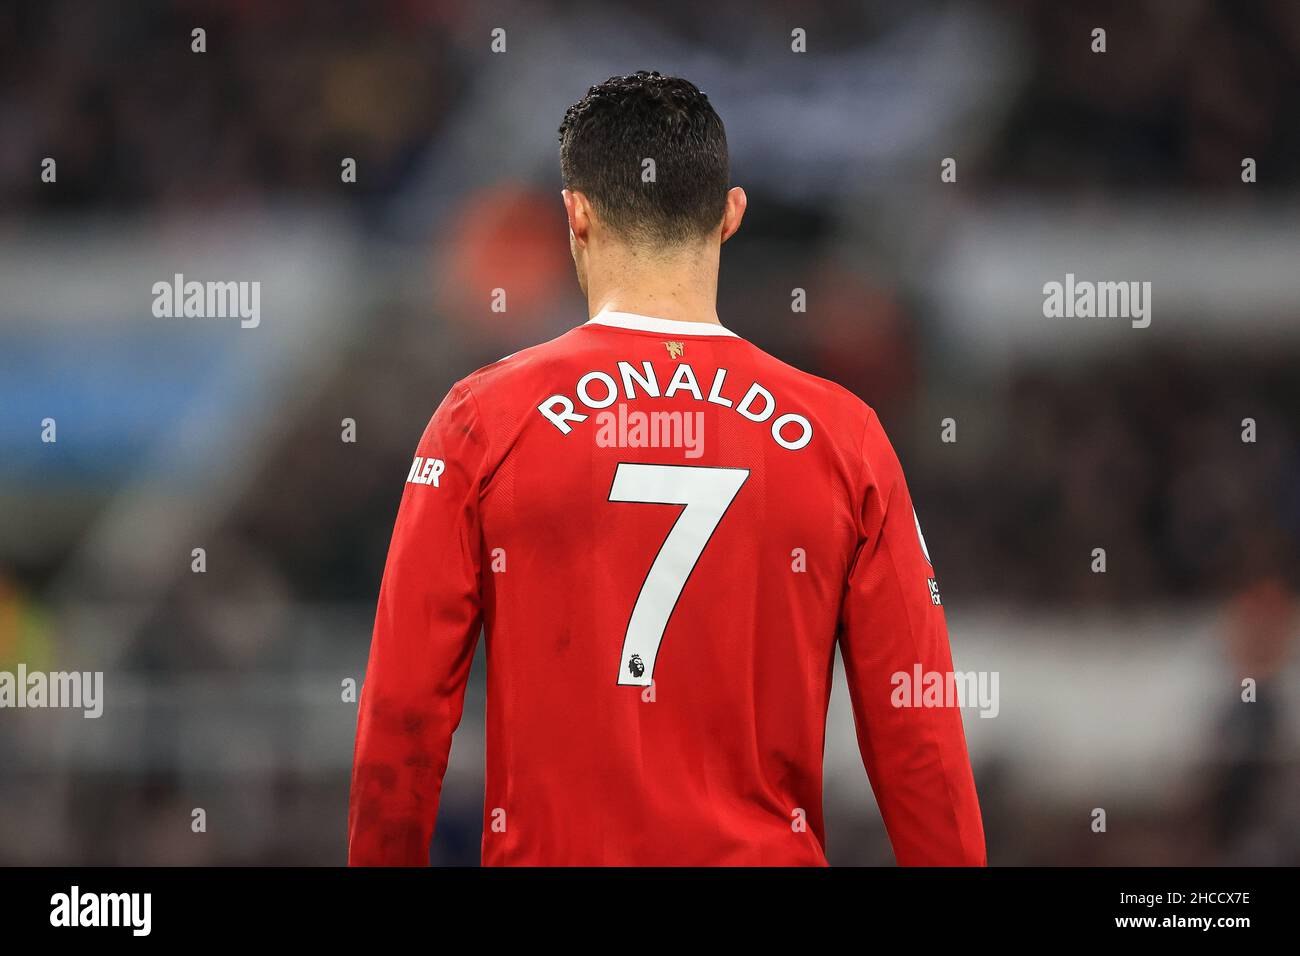 Cristiano Ronaldo #7 of Manchester United back of shirt during the game  Stock Photo - Alamy